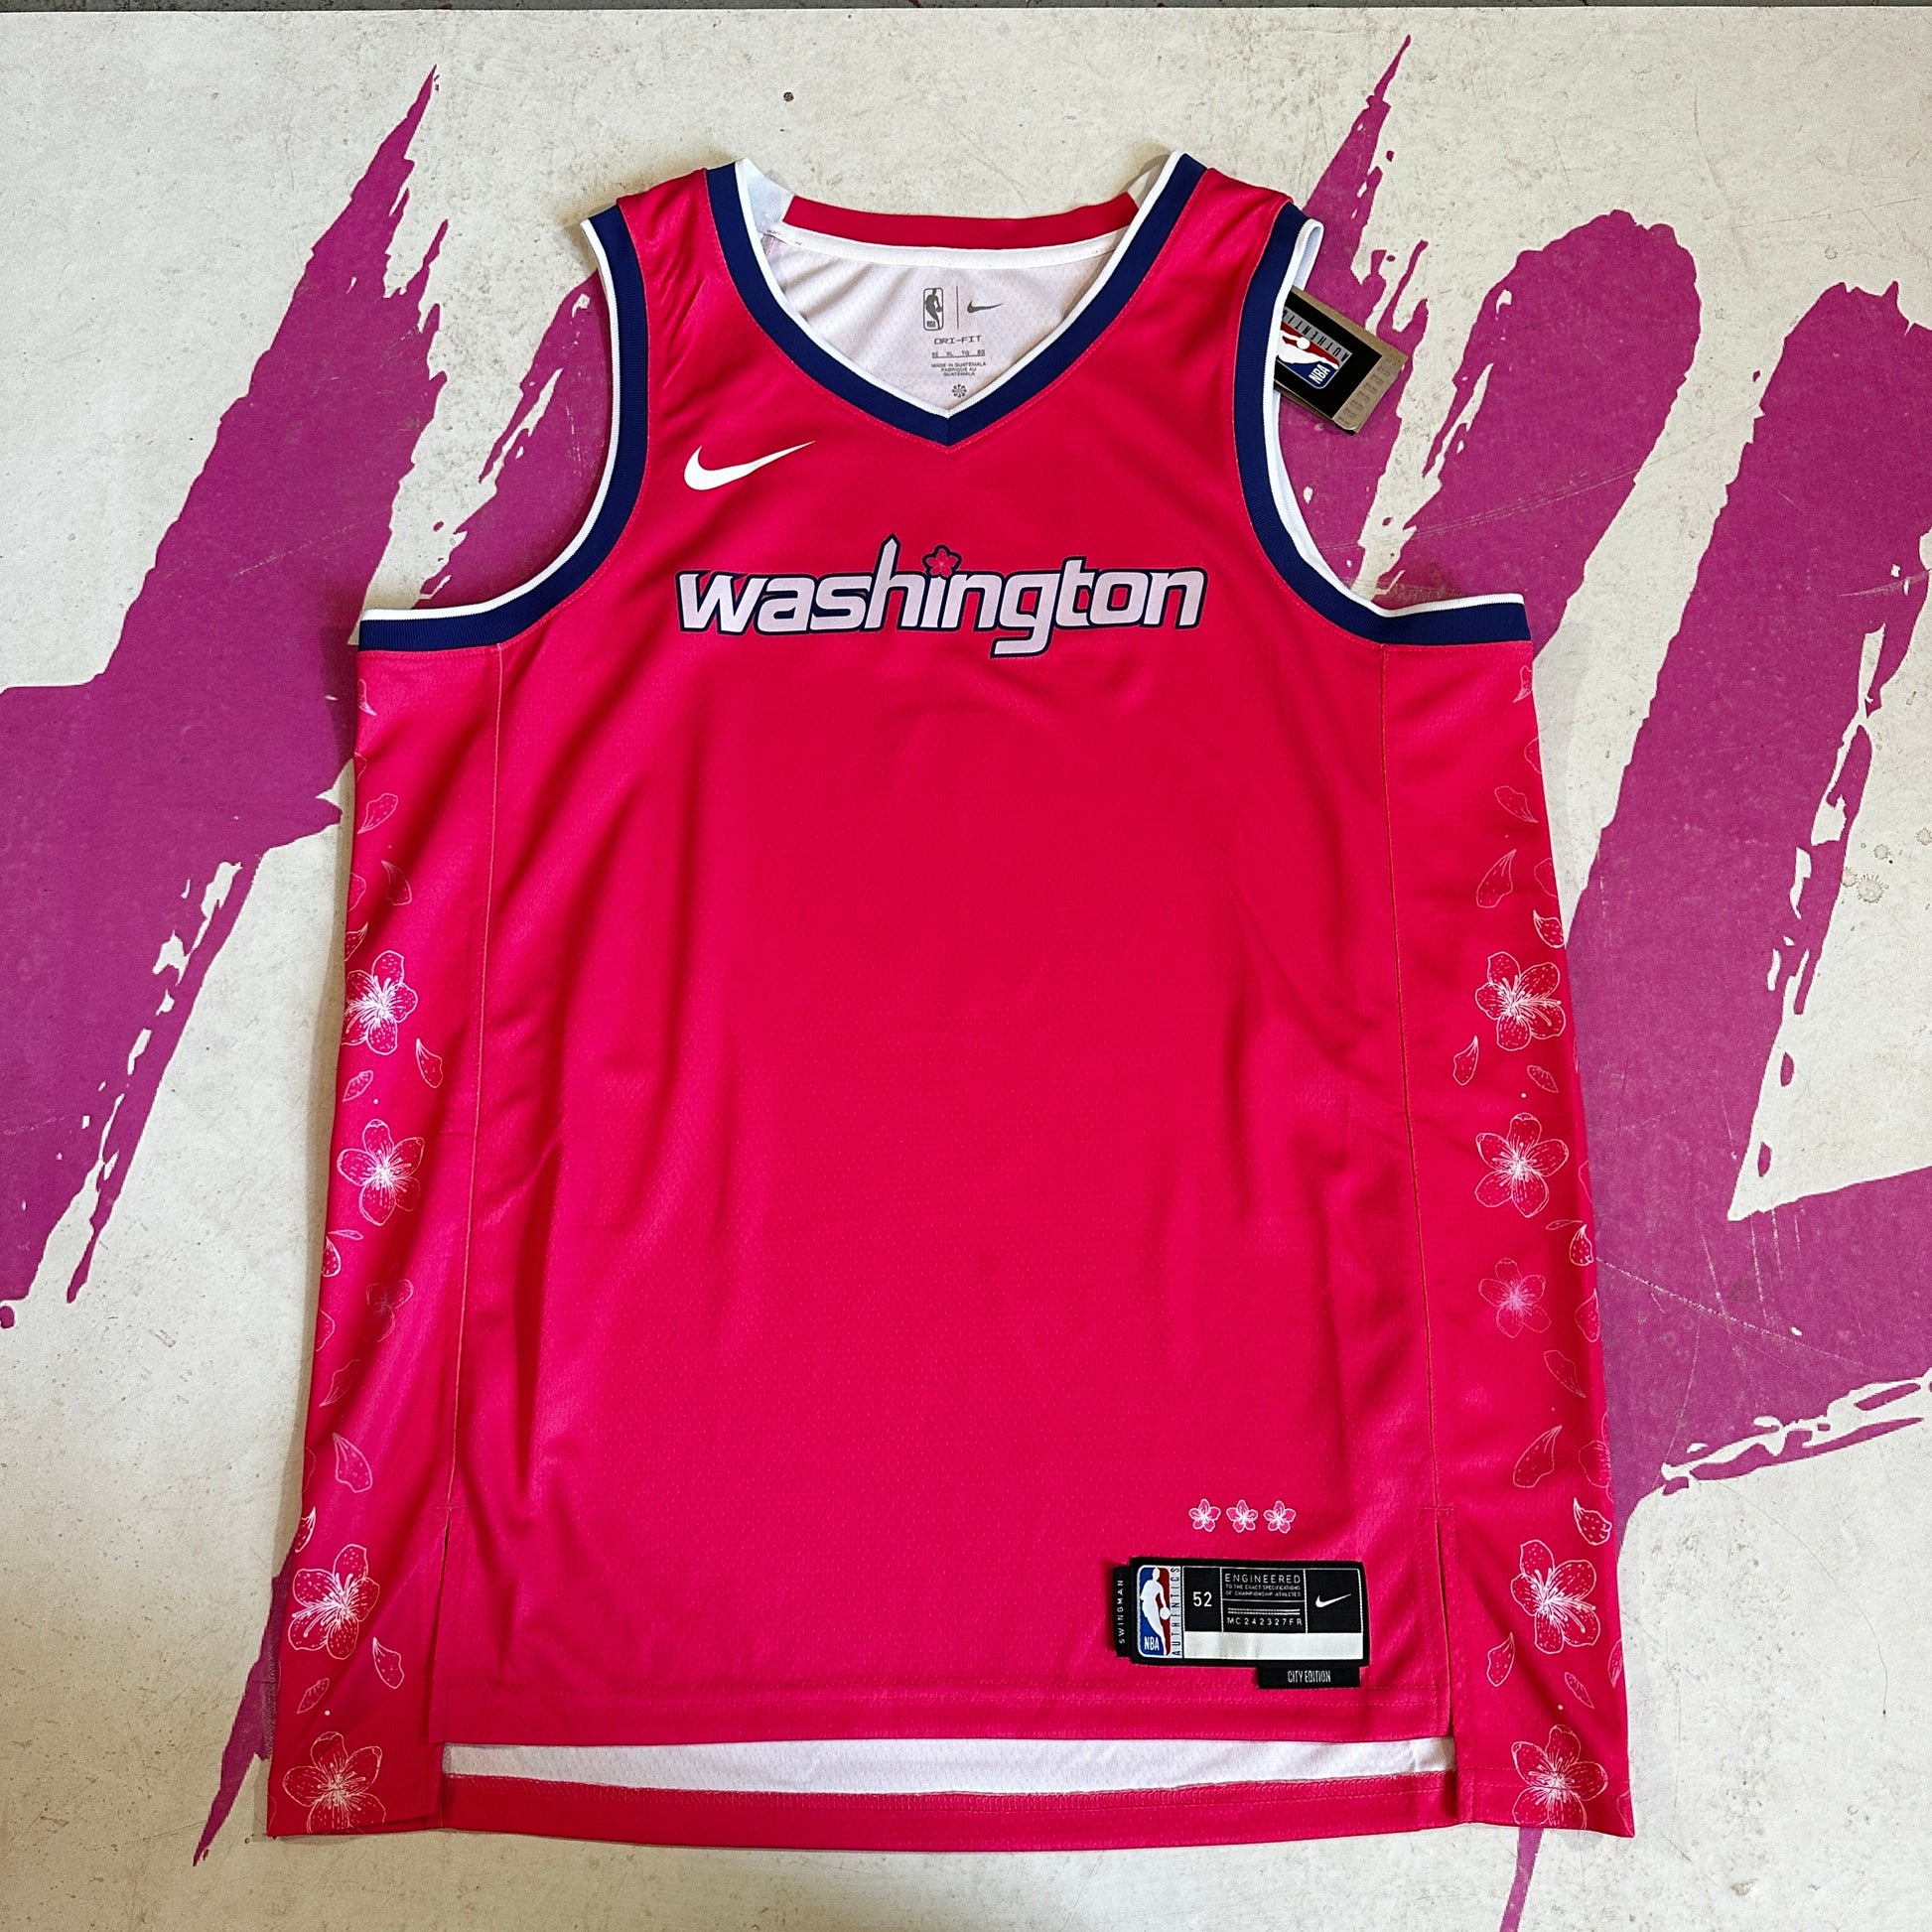 The Complete Guide to Nike NBA Washington Wizards Edition Jerseys